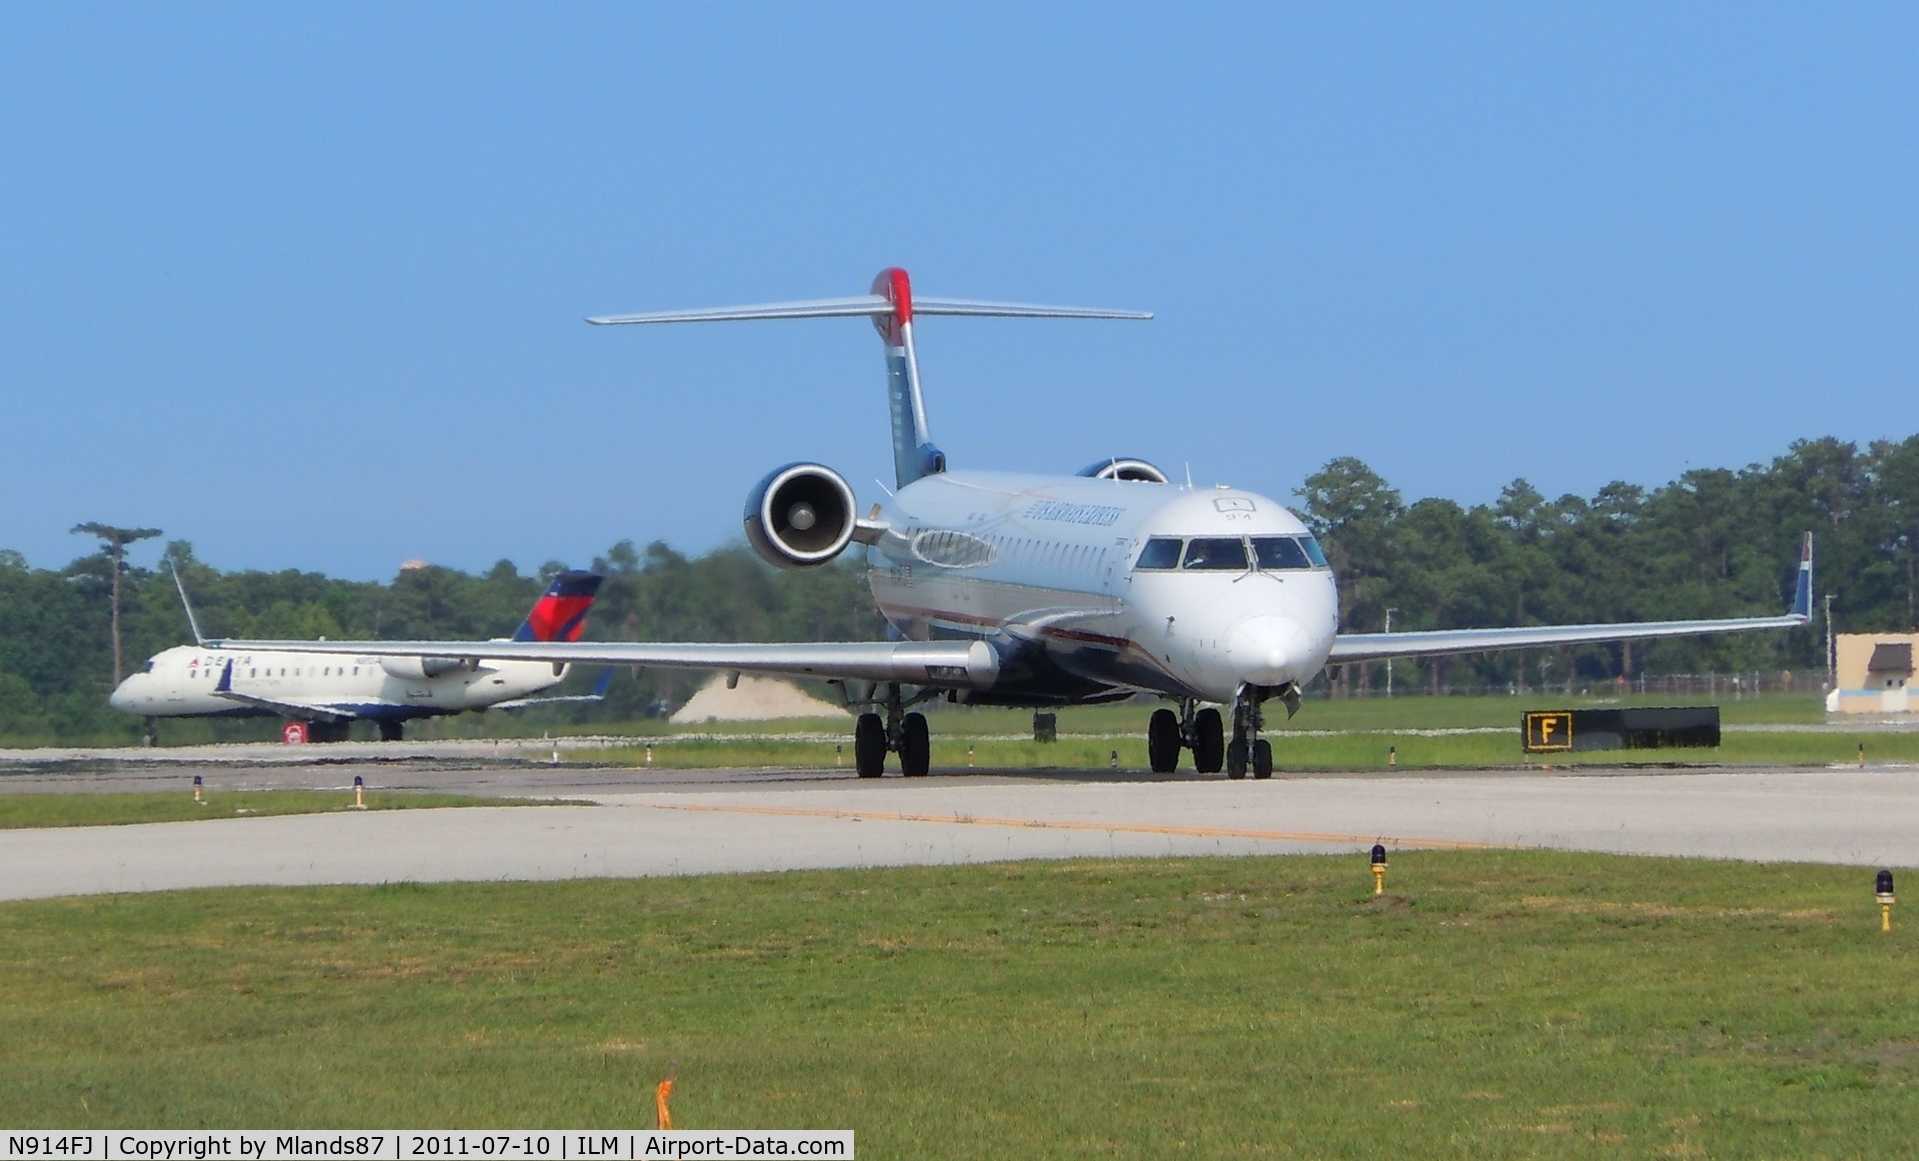 N914FJ, 2004 Bombardier CRJ-900ER (CL-600-2D24) C/N 15014, CL 600 taxiing to gate with traffic taking off